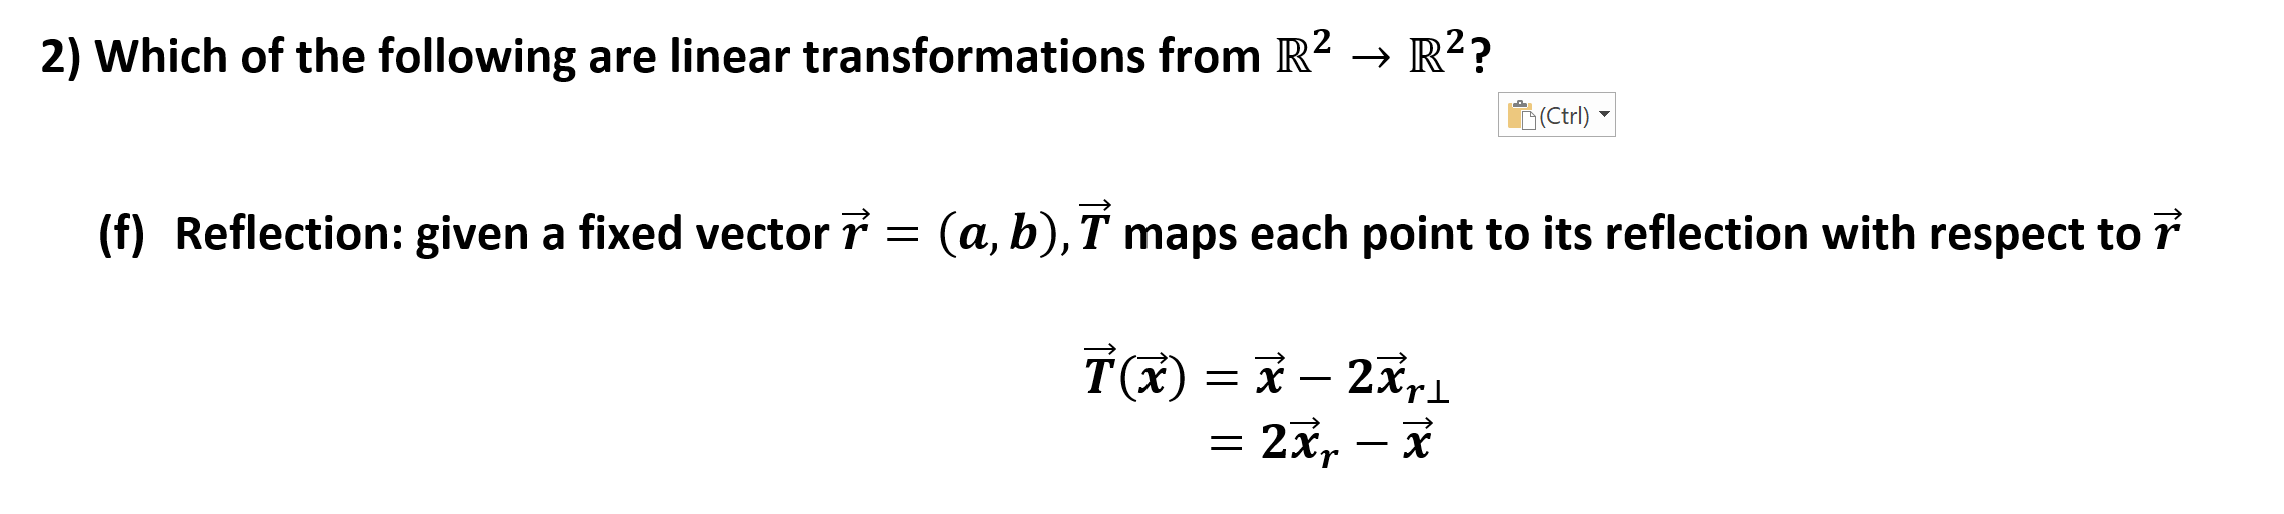 2) Which of the following are linear transformations from R2 >R2?
|(Ctrl)
(f) Reflection: given a fixed vector 7 = (a, b), T maps each point to its reflection with respect to 7
Tx)
= 2x, - i
= x- 2xri
